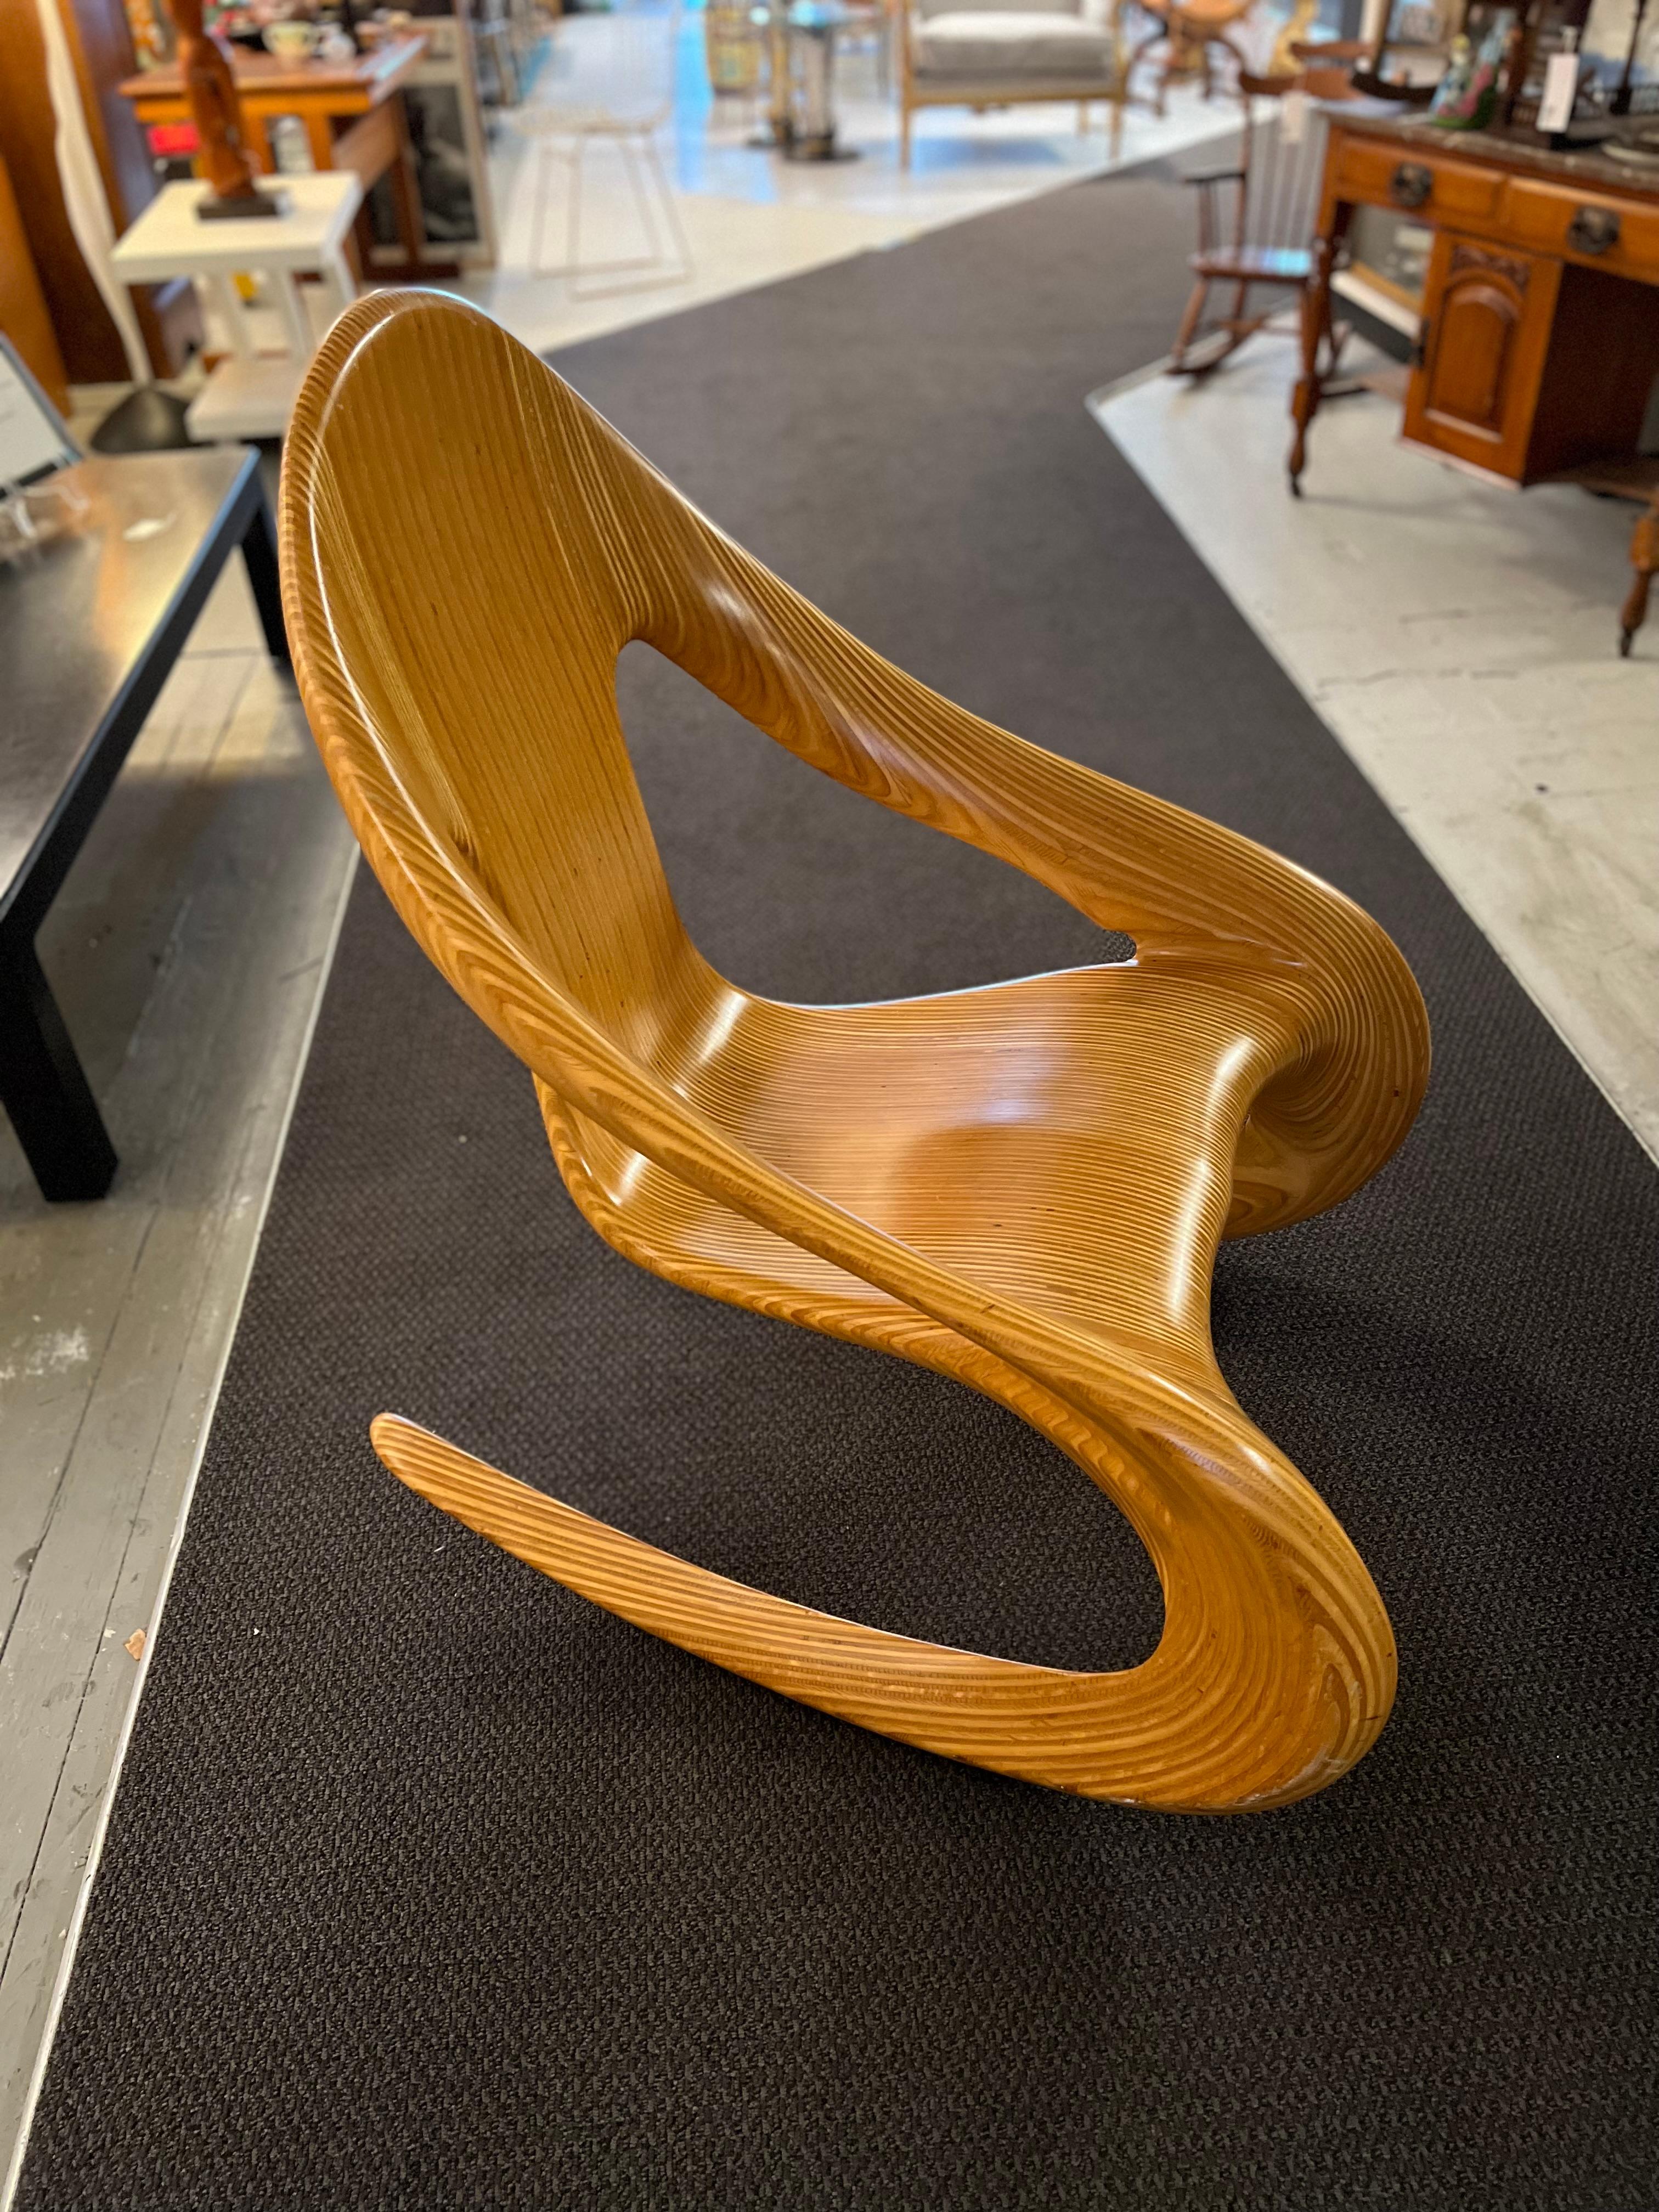 Unique by its incredible shape, wood use, and comfort, the rocker was made by Wisconsin woodworker Carl Gromoll (b. 1950). 
It is a statement piece!, signed and dated 1983 under the seat.
Handcrafted of stack-laminated, carved, and polished Baltic